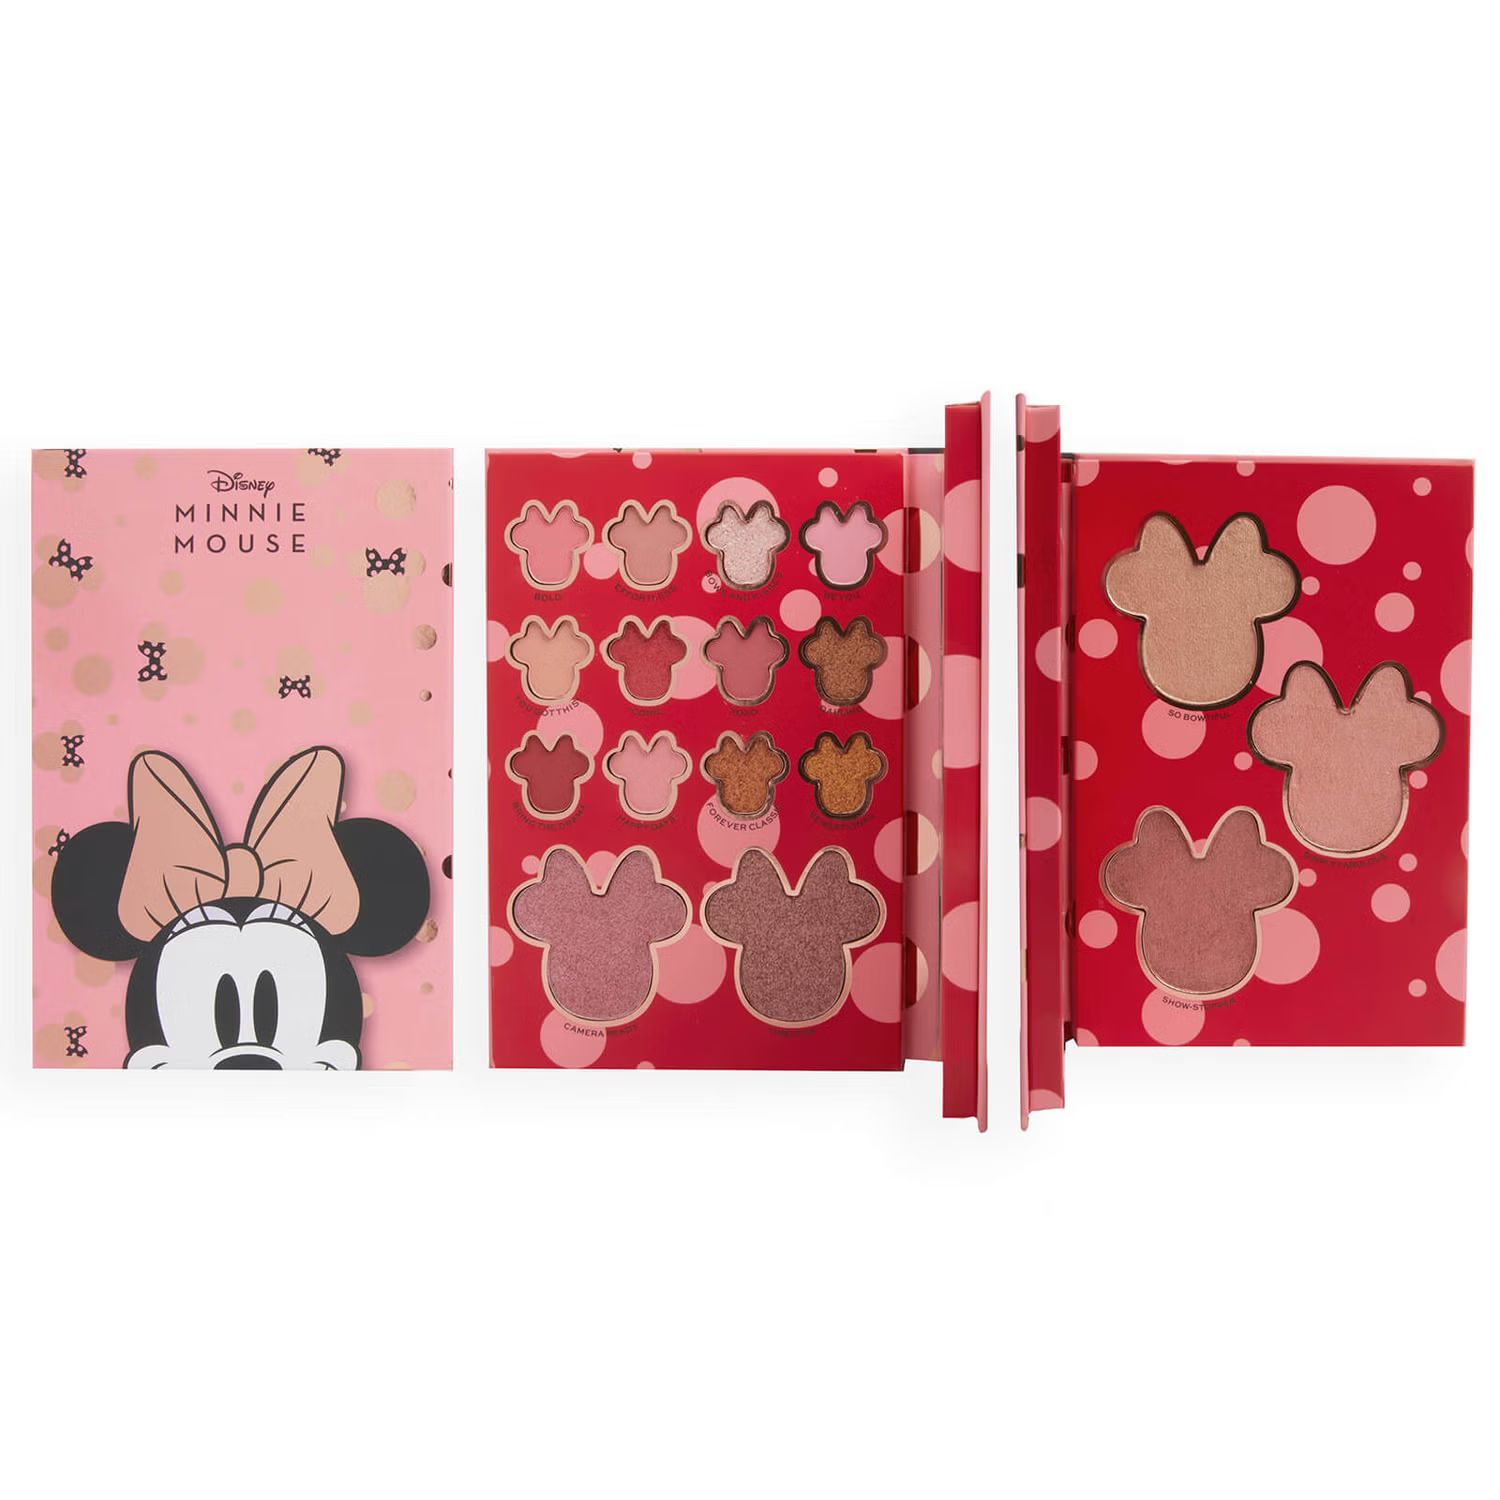 Revolution Disney's Minnie Mouse and Makeup Revolution All Eyes on Minnie Palette | Revolution Beauty US